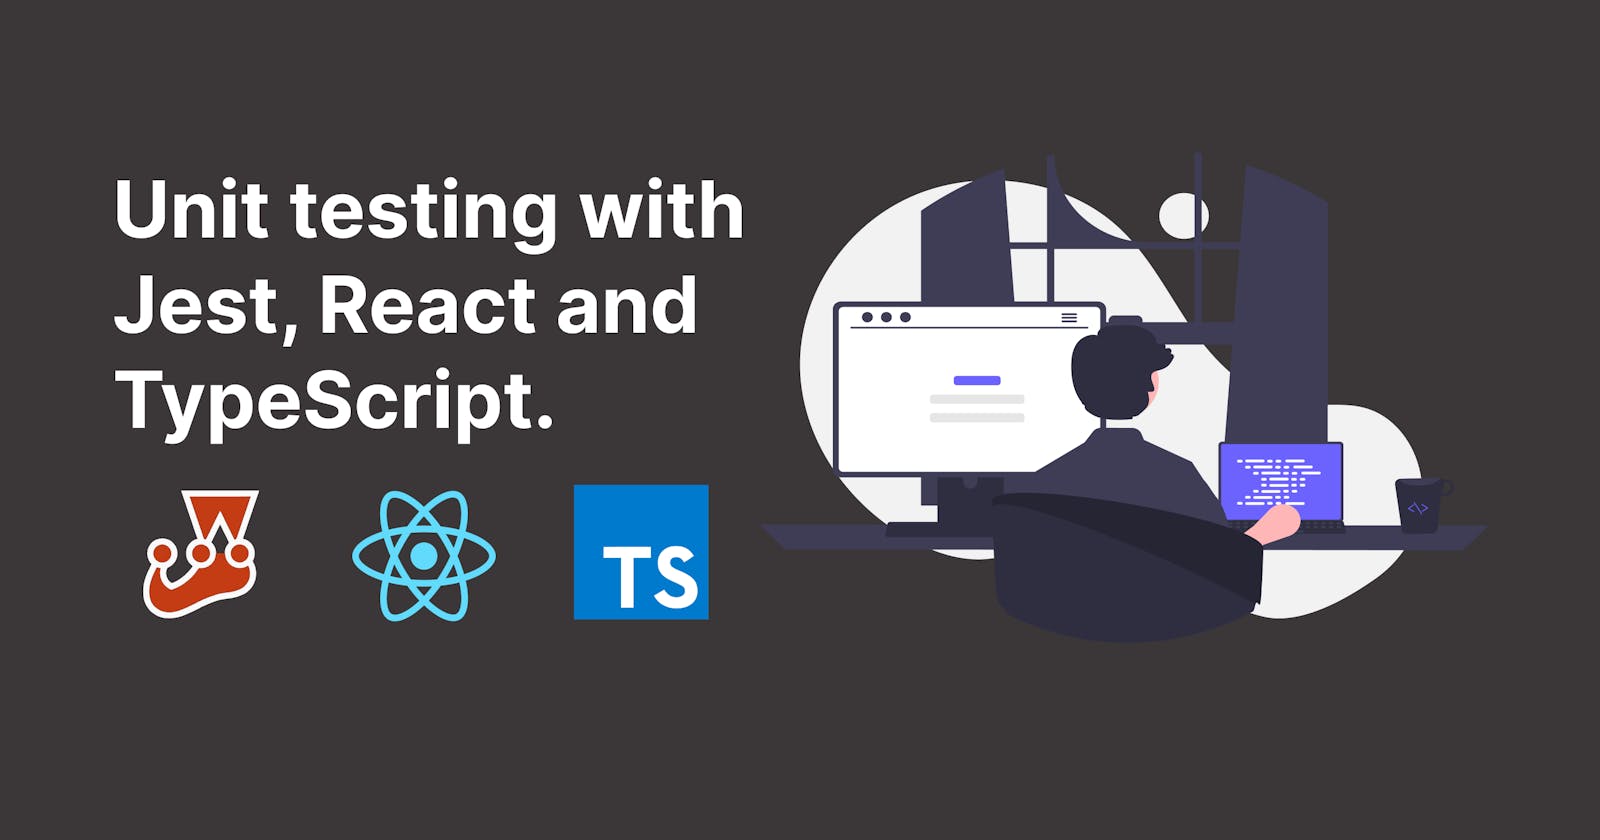 Unit testing with Jest, React, and TypeScript